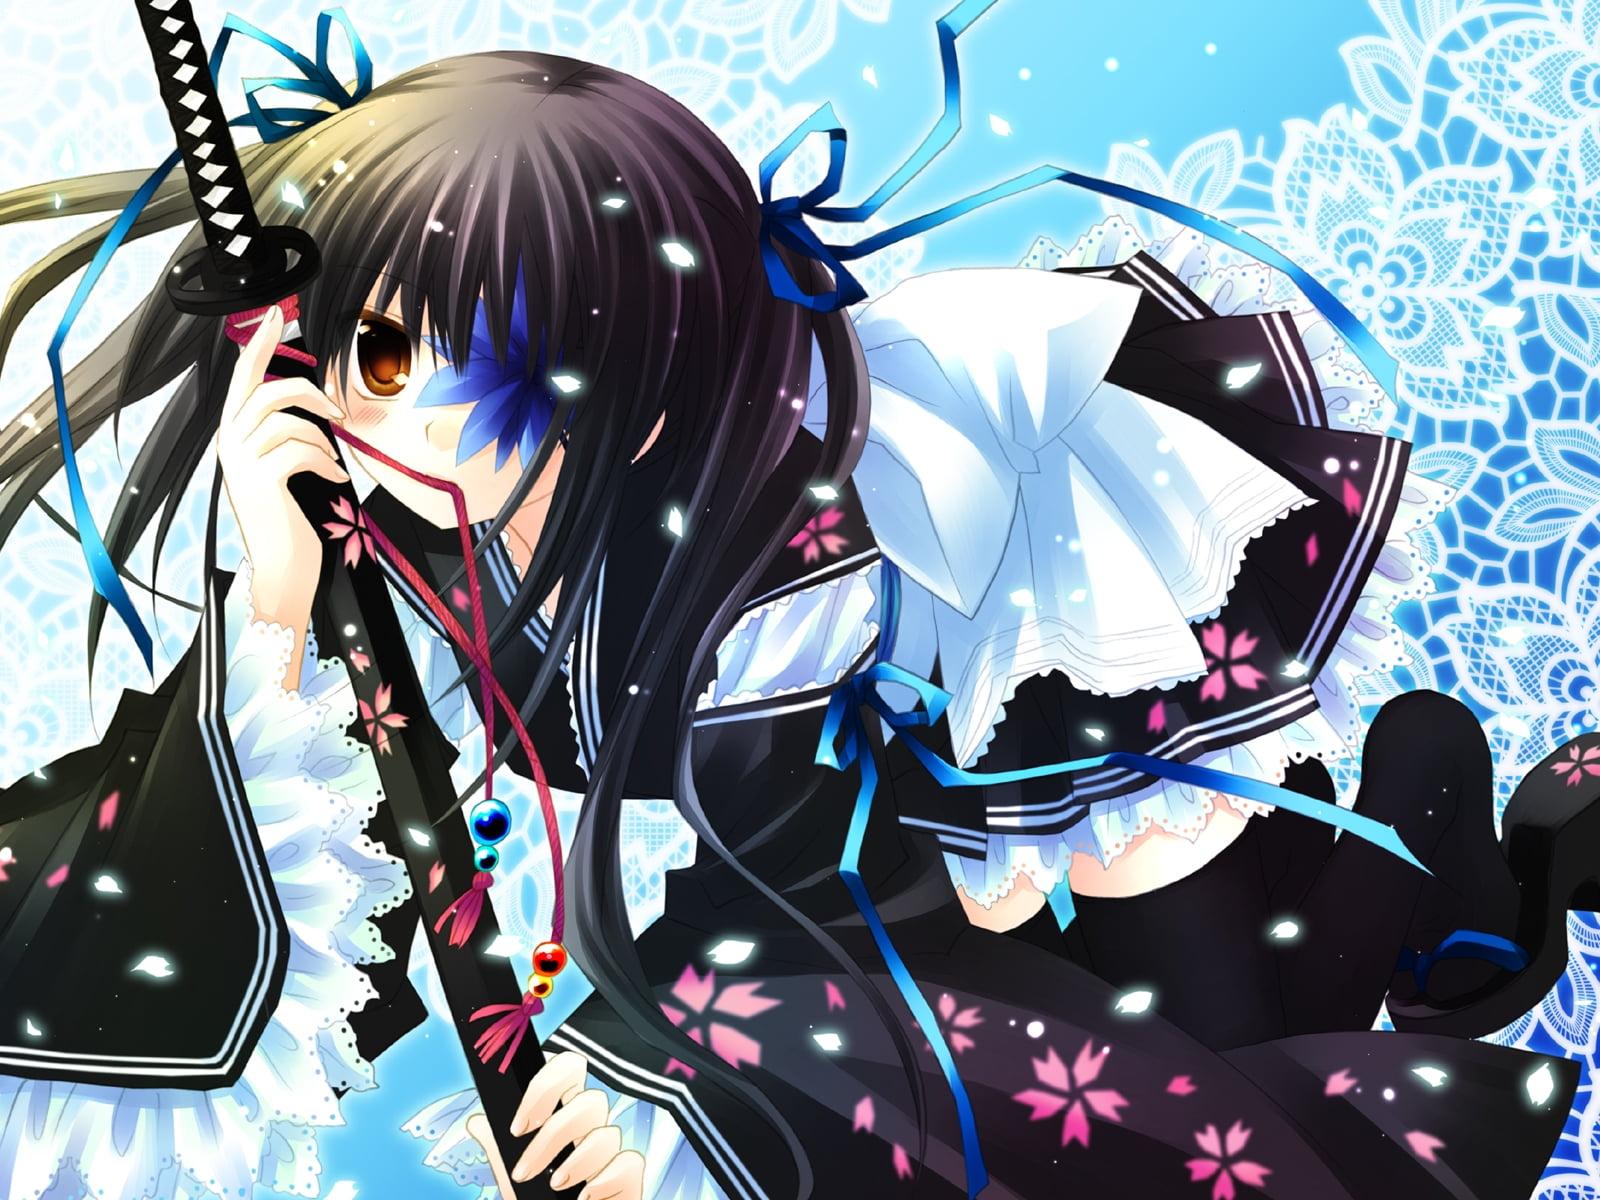 Black haired girl anime character holding katana and wearing